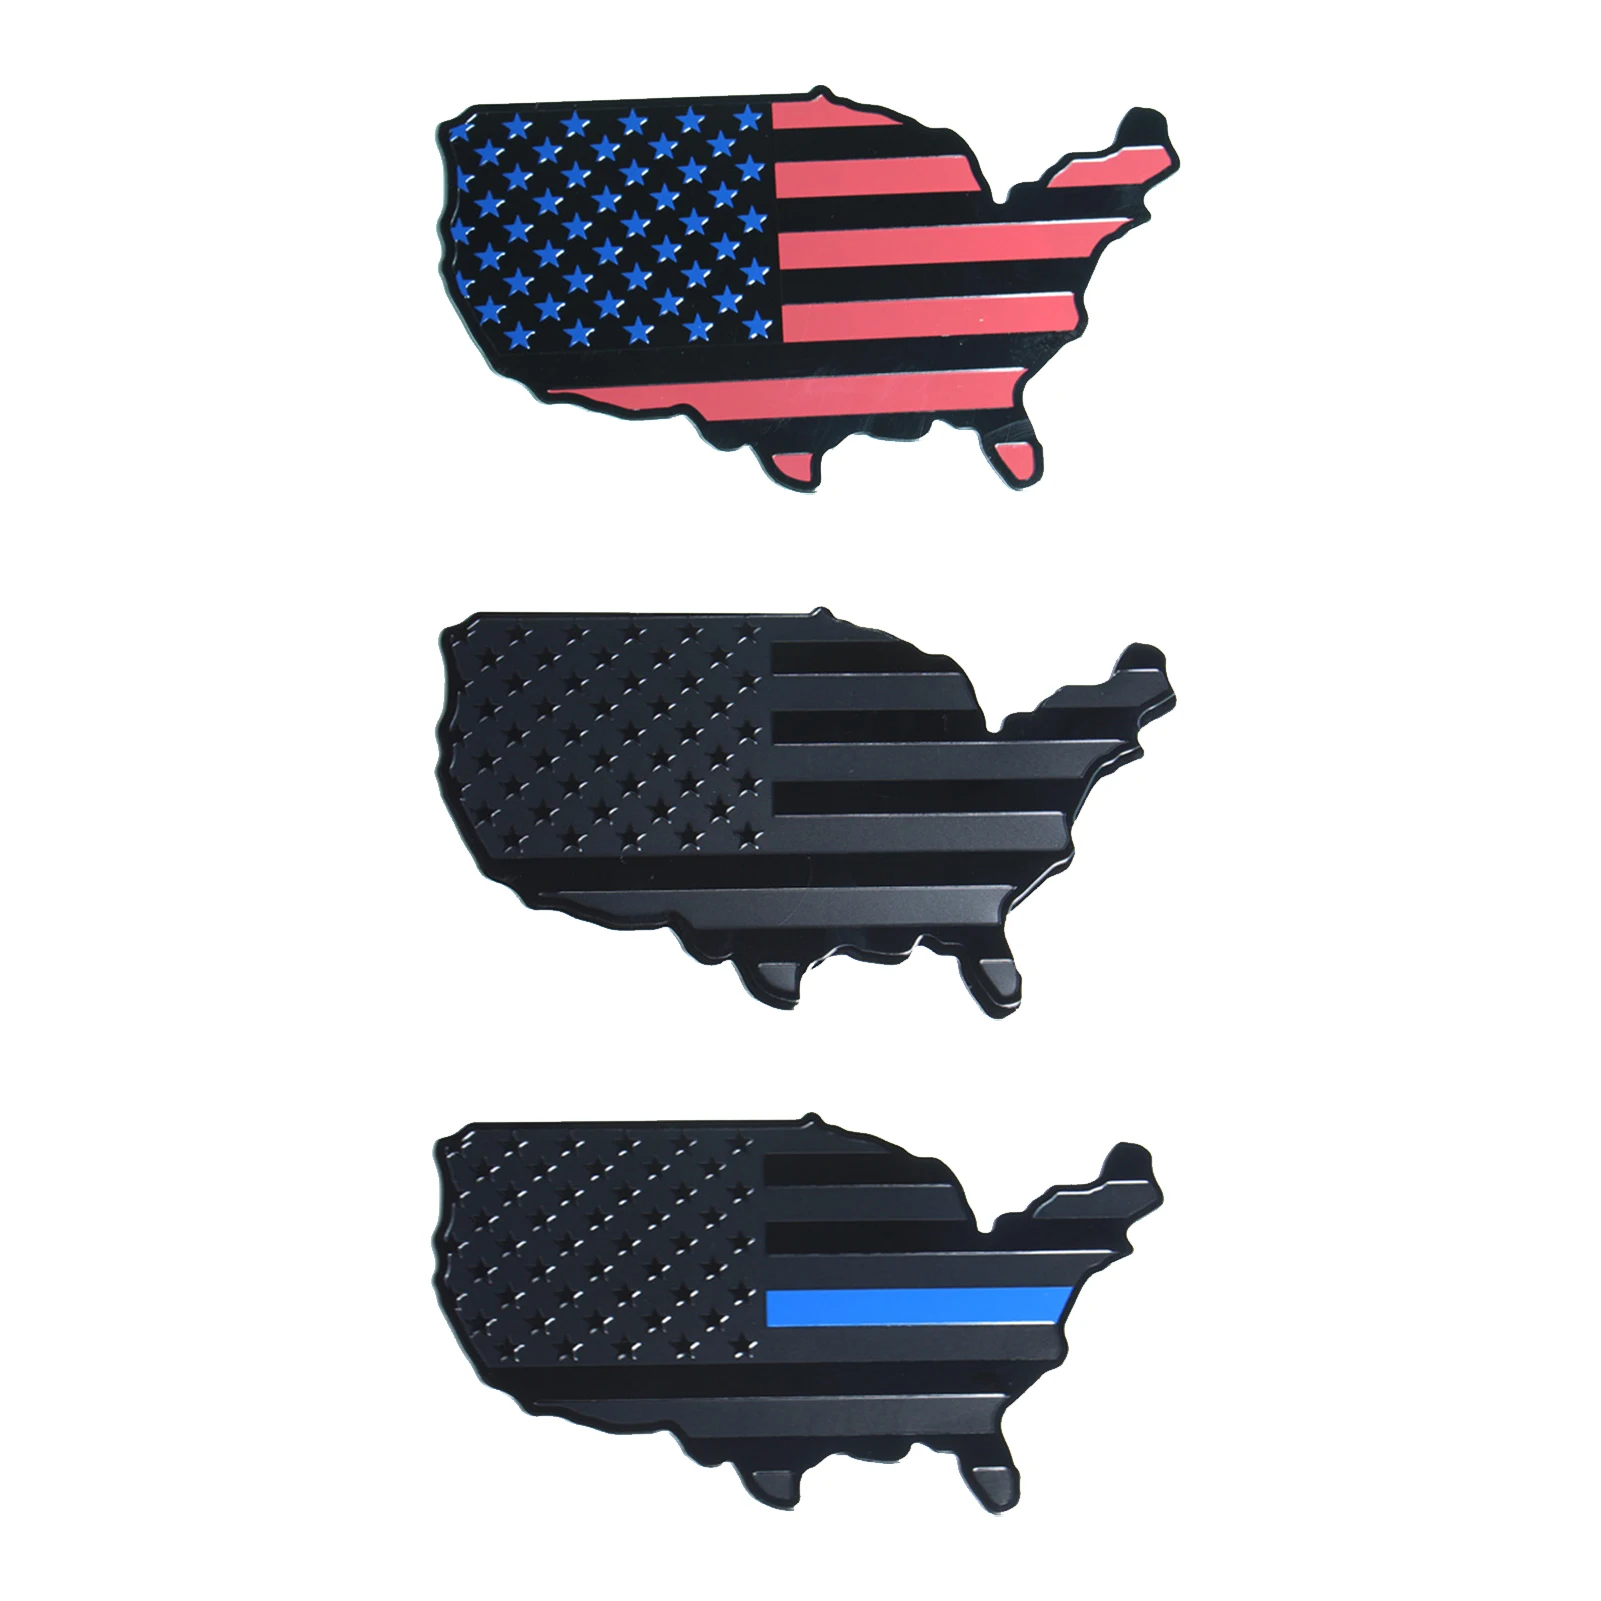 

American Flag Map Emblem Sticker Decals America Map Decal For Trucks Metal Badge For Car Truck SUV Motorcycle Wall Decoration